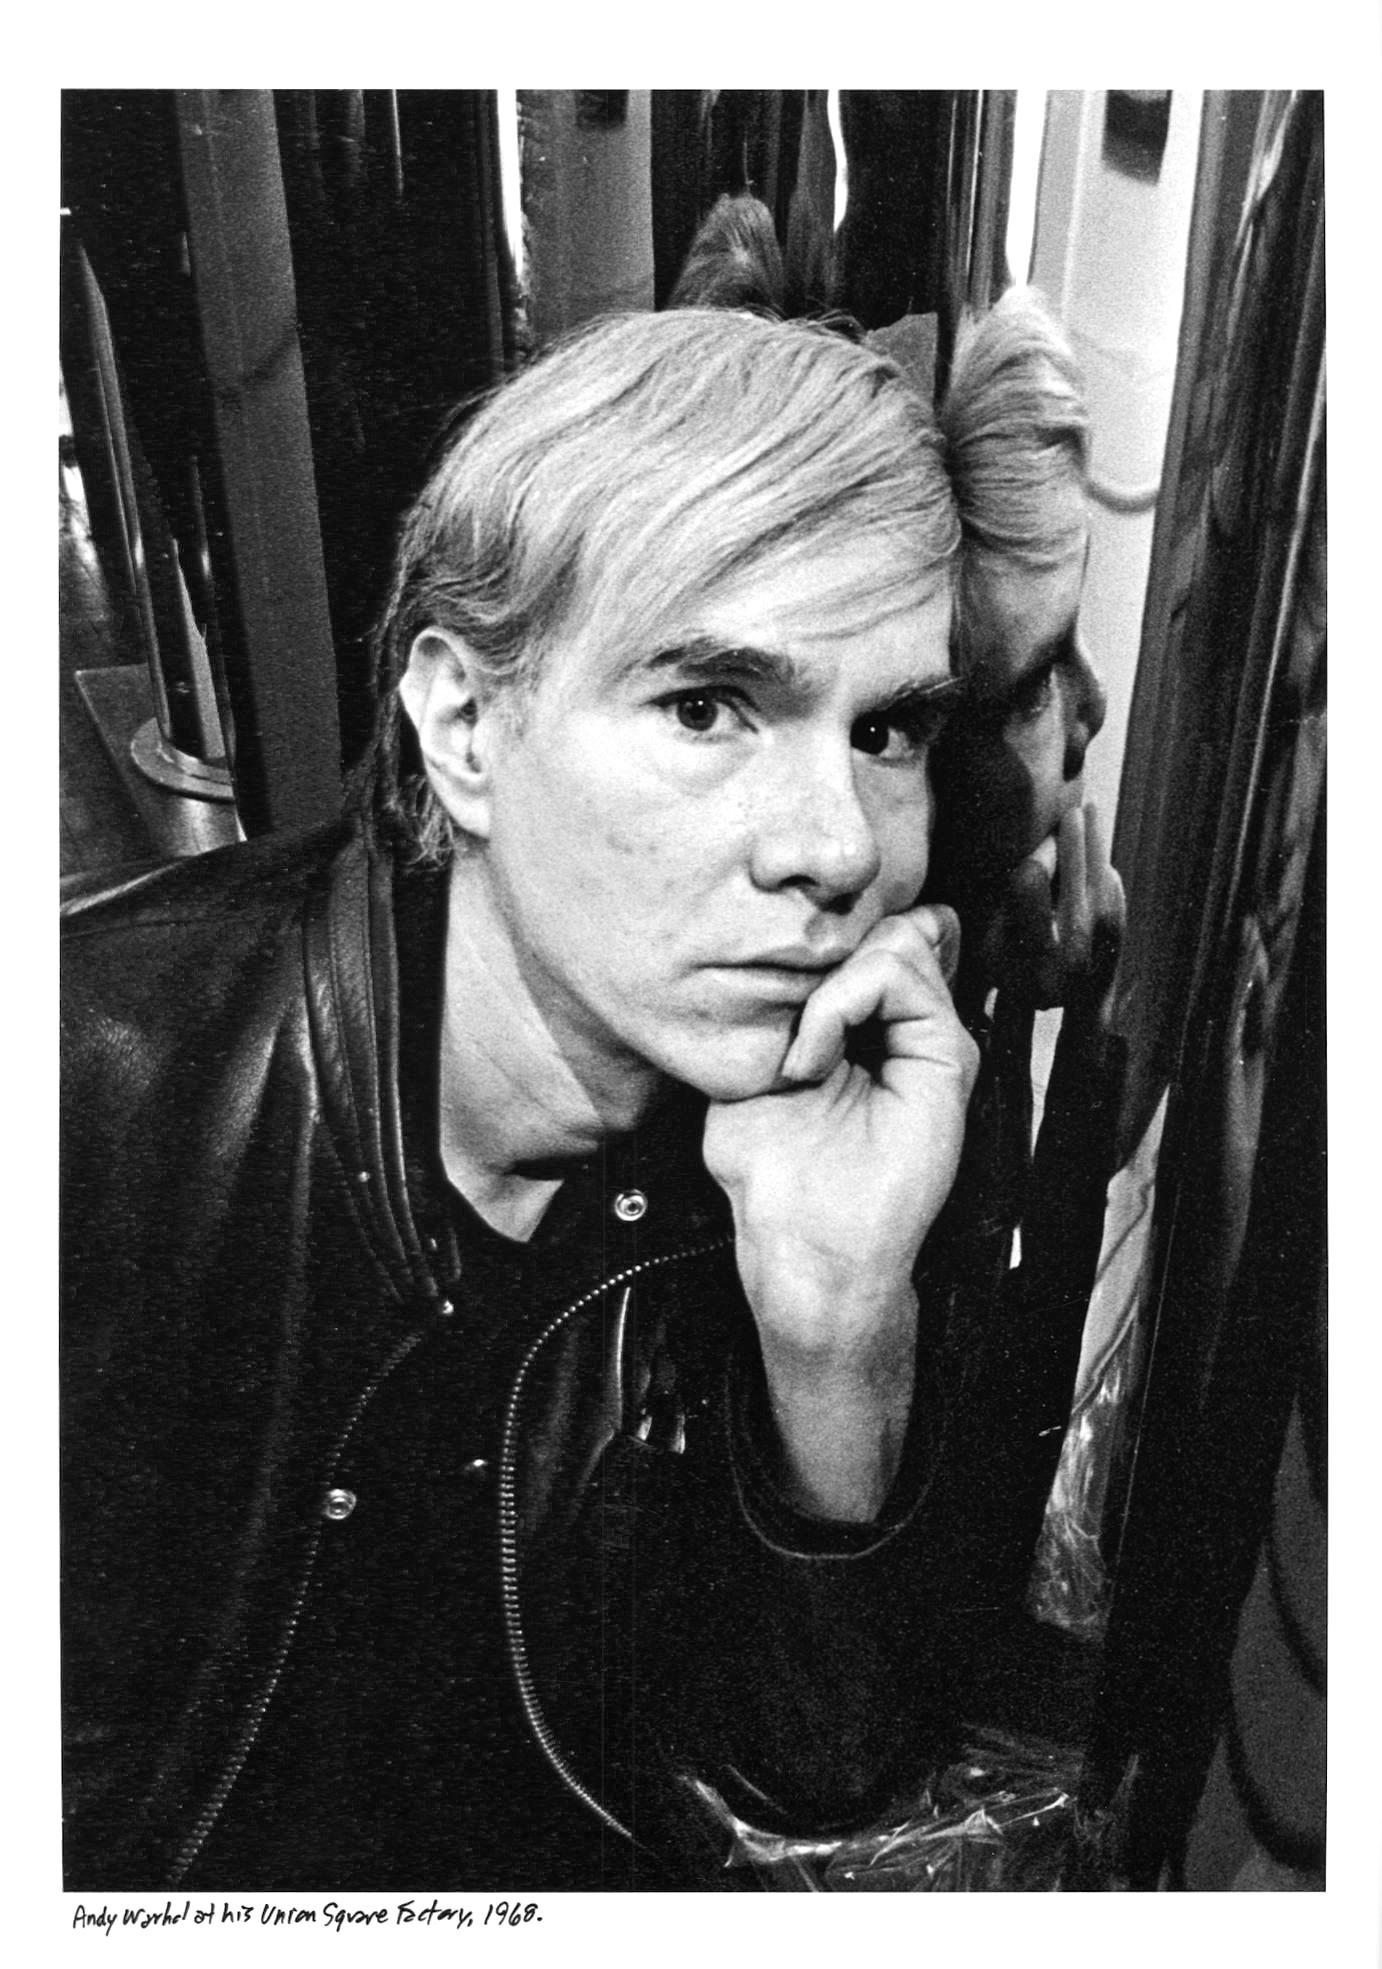 This is a archival pigment print, 13 x 19" of Jack Mitchell's photograph of Andy Warhol at his Union Square Factory in 1968. 

Jack Mitchell, (1925-2013) bulging photographic portfolio of actors, writers, painters, musicians and especially dancers